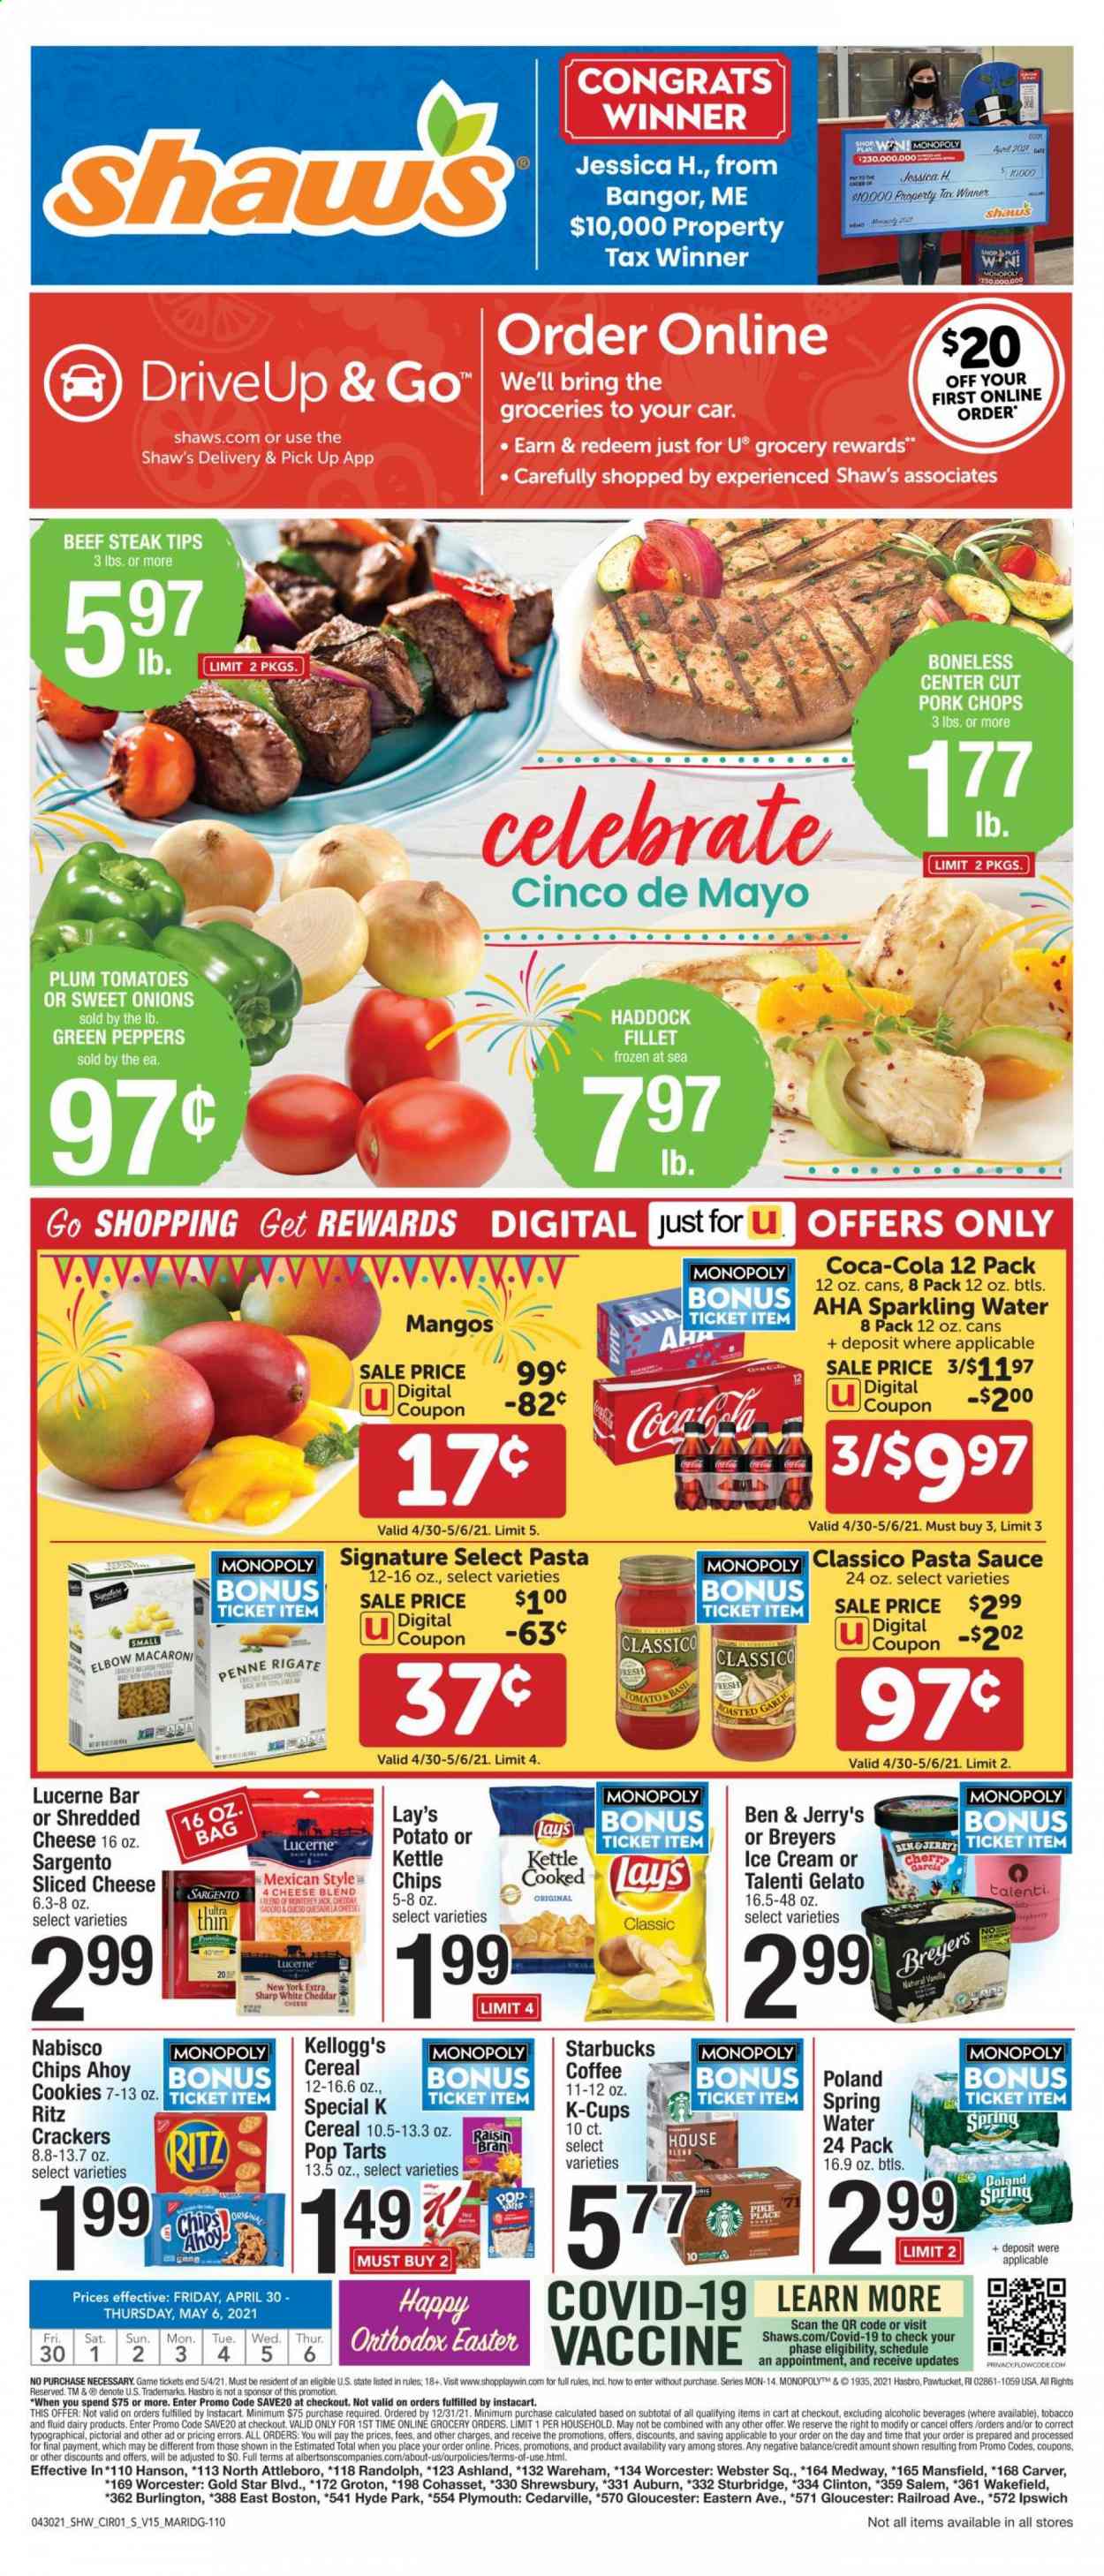 thumbnail - Shaw’s Flyer - 04/30/2021 - 05/06/2021 - Sales products - tomatoes, peppers, mango, haddock, pasta sauce, macaroni, sauce, Monterey Jack cheese, shredded cheese, sliced cheese, Sargento, ice cream, Ben & Jerry's, Talenti Gelato, gelato, cookies, crackers, Kellogg's, Pop-Tarts, RITZ, Lay’s, cereals, penne, Classico, Coca-Cola, spring water, sparkling water, coffee, Starbucks, coffee capsules, K-Cups, Ron Pelicano, beef meat, beef steak, steak, pork chops, pork meat, Sharp. Page 1.